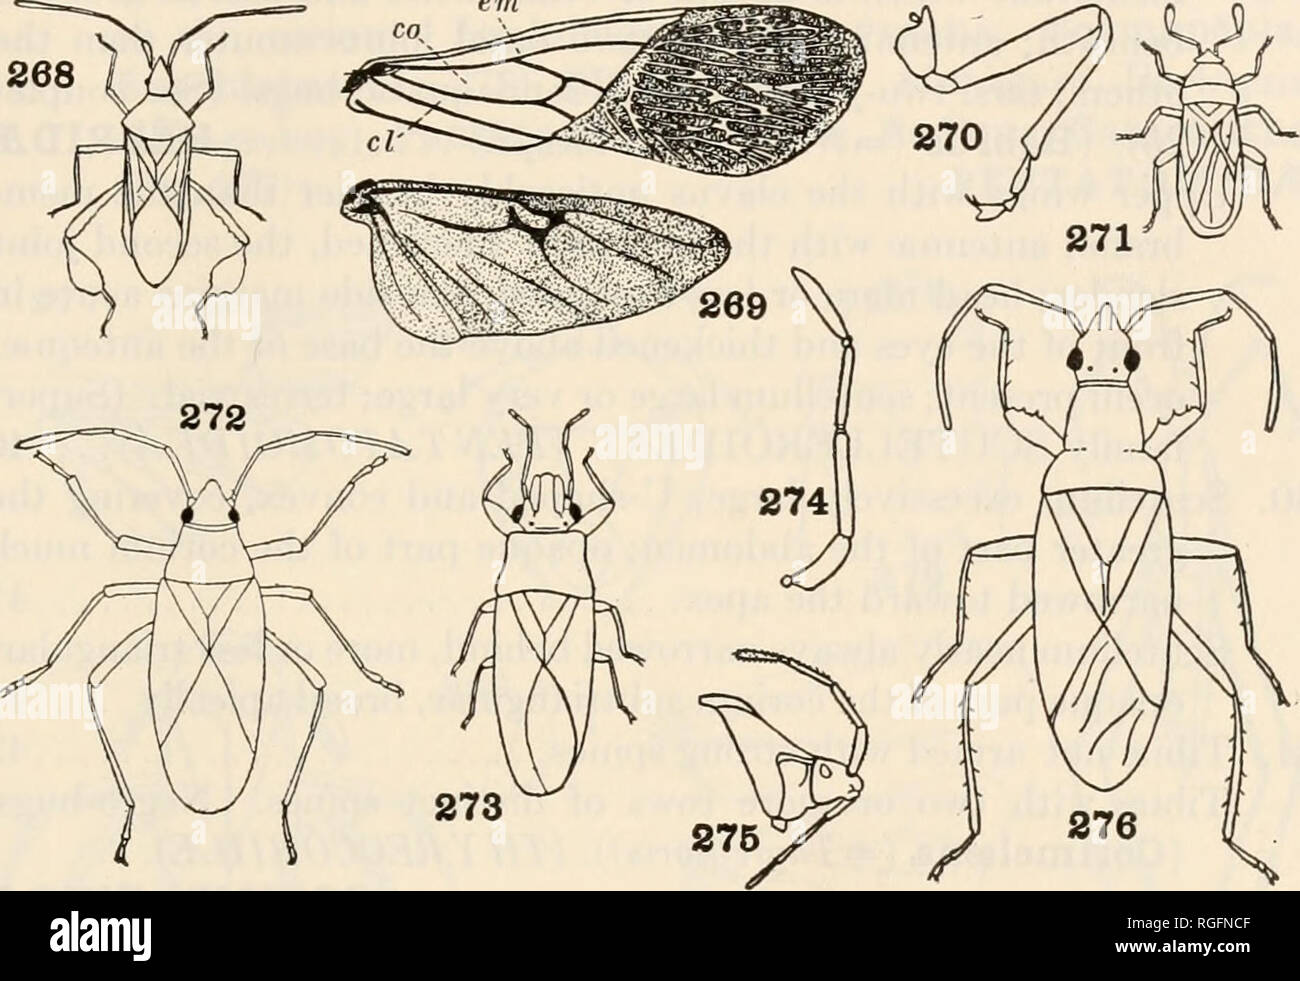 . Bulletin of the Museum of Comparative Zoology at Harvard College. Zoology. BRUES AND MELANDER: CLASSIFICATION OF INSECTS 149 37. Veins of membrane usually four or five in number and not forming anteapical cells. (Geocoris, Nysius, cosmop. (False chinch- bug); Graptostethus, palsearc, ethiop., indomal.; Oncopel- tus, widespr.; Lygaeus, Ligyrocoris (Fig. 276), Lygaeosoma, widespr.;Blissus (B. leucopterus, Chinch-bug (Fig. 271))). (GEO- CORIDJE, MYODOCHIDM) LYG-ffilD-ffi em. Figs. 268-276. Hemiptera 268. Leptoglossus (Chittenden) Coreidse. 269. Anasa, wings (Tower) Coreidse. 270. Anasa, leg (To Stock Photo